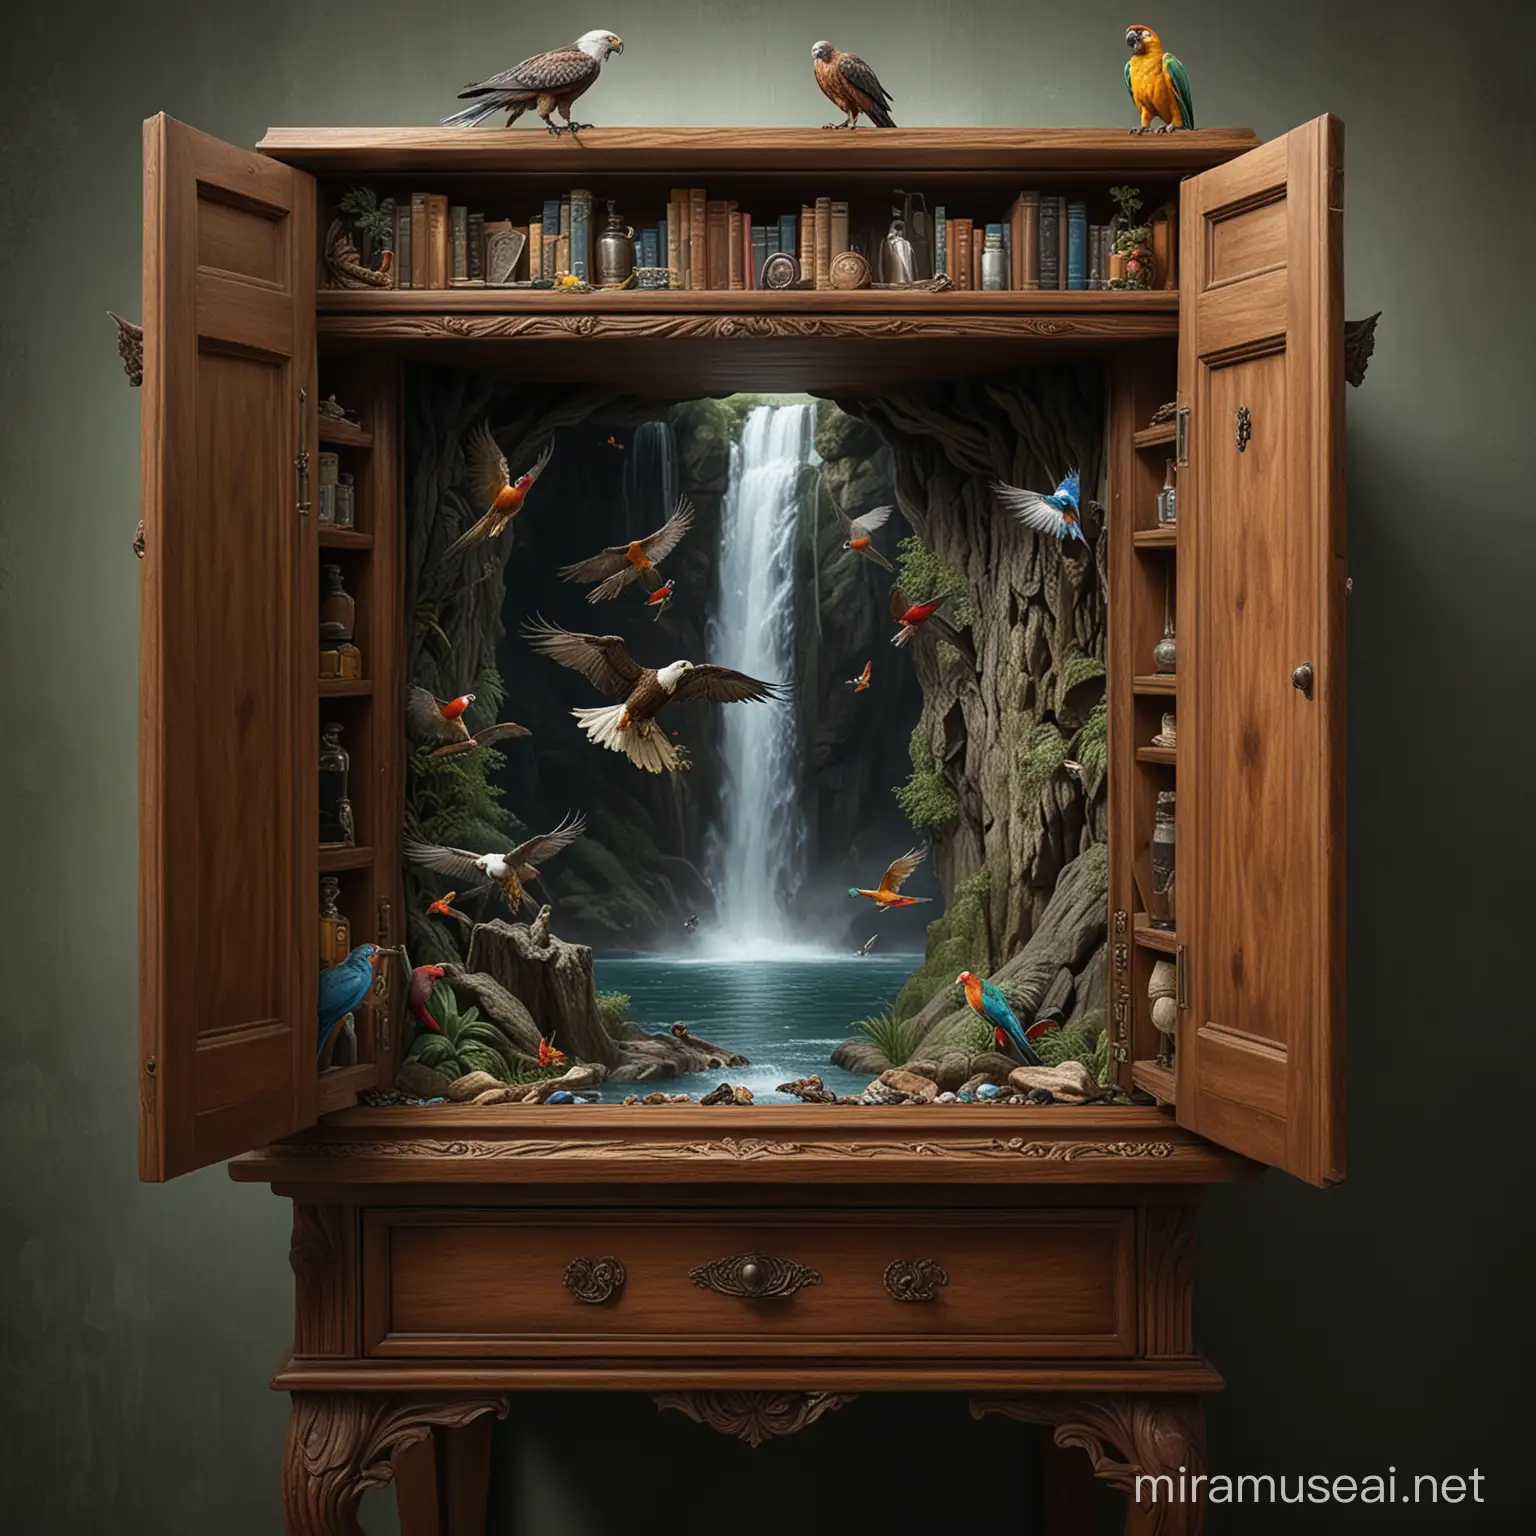 Create a highly detailed image of a man opening a cabinet at the side of his table, isolated inside the cabinet is a waterfall with eagle, parrots, birds, ultra realistic